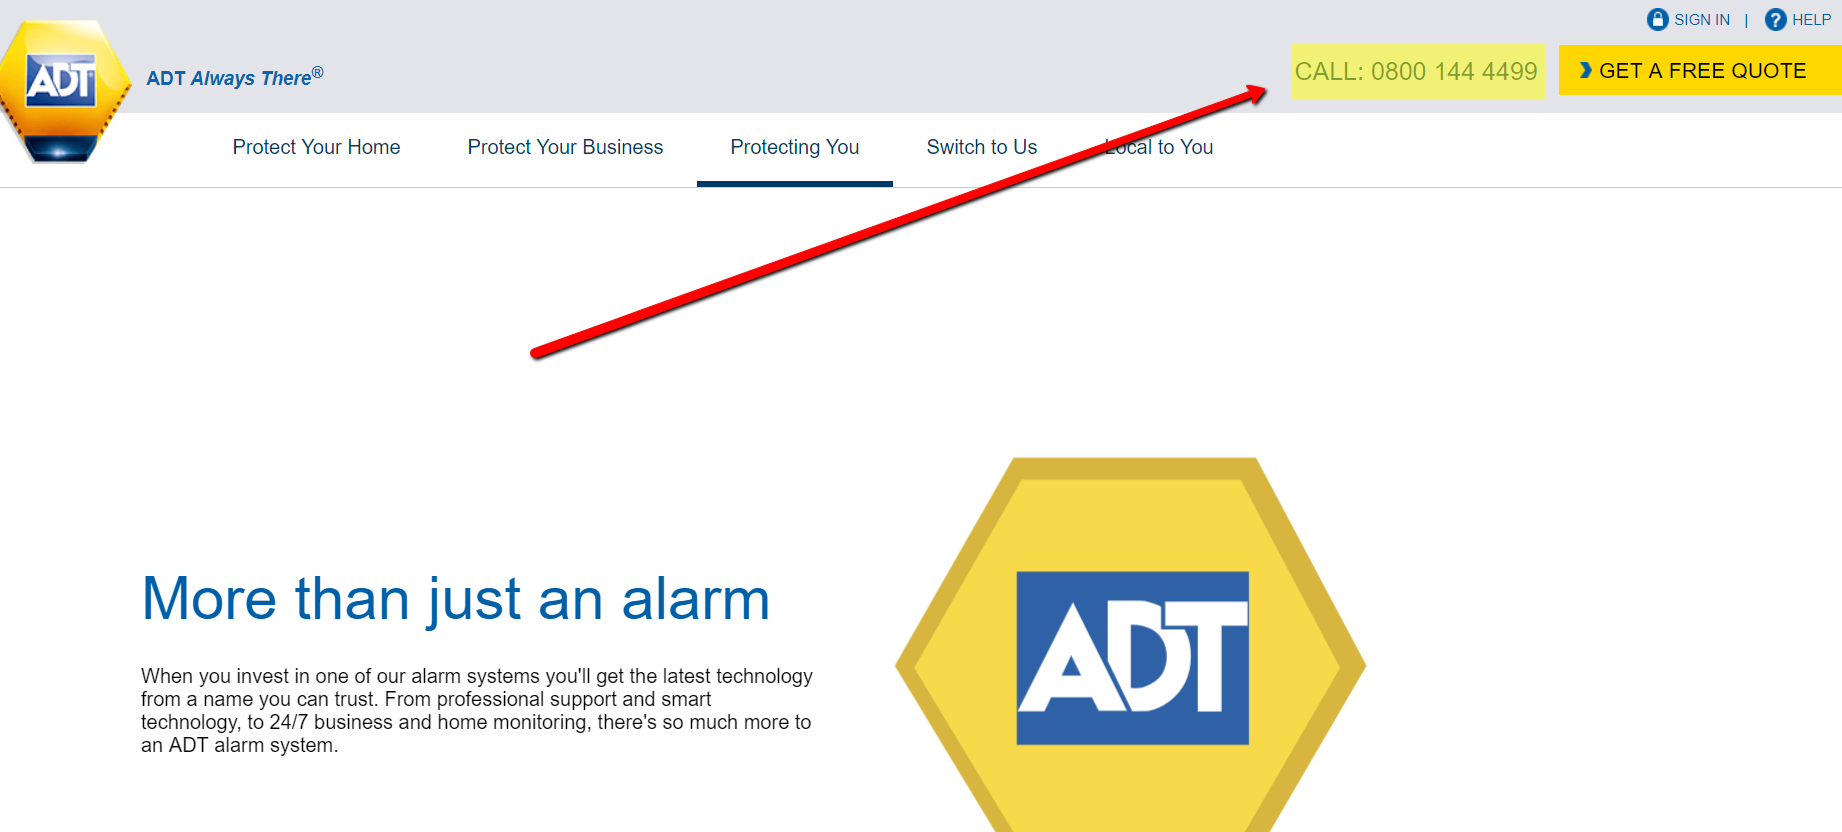 ADT Security Customer Service Contact Number: 0800 144 4499 UK